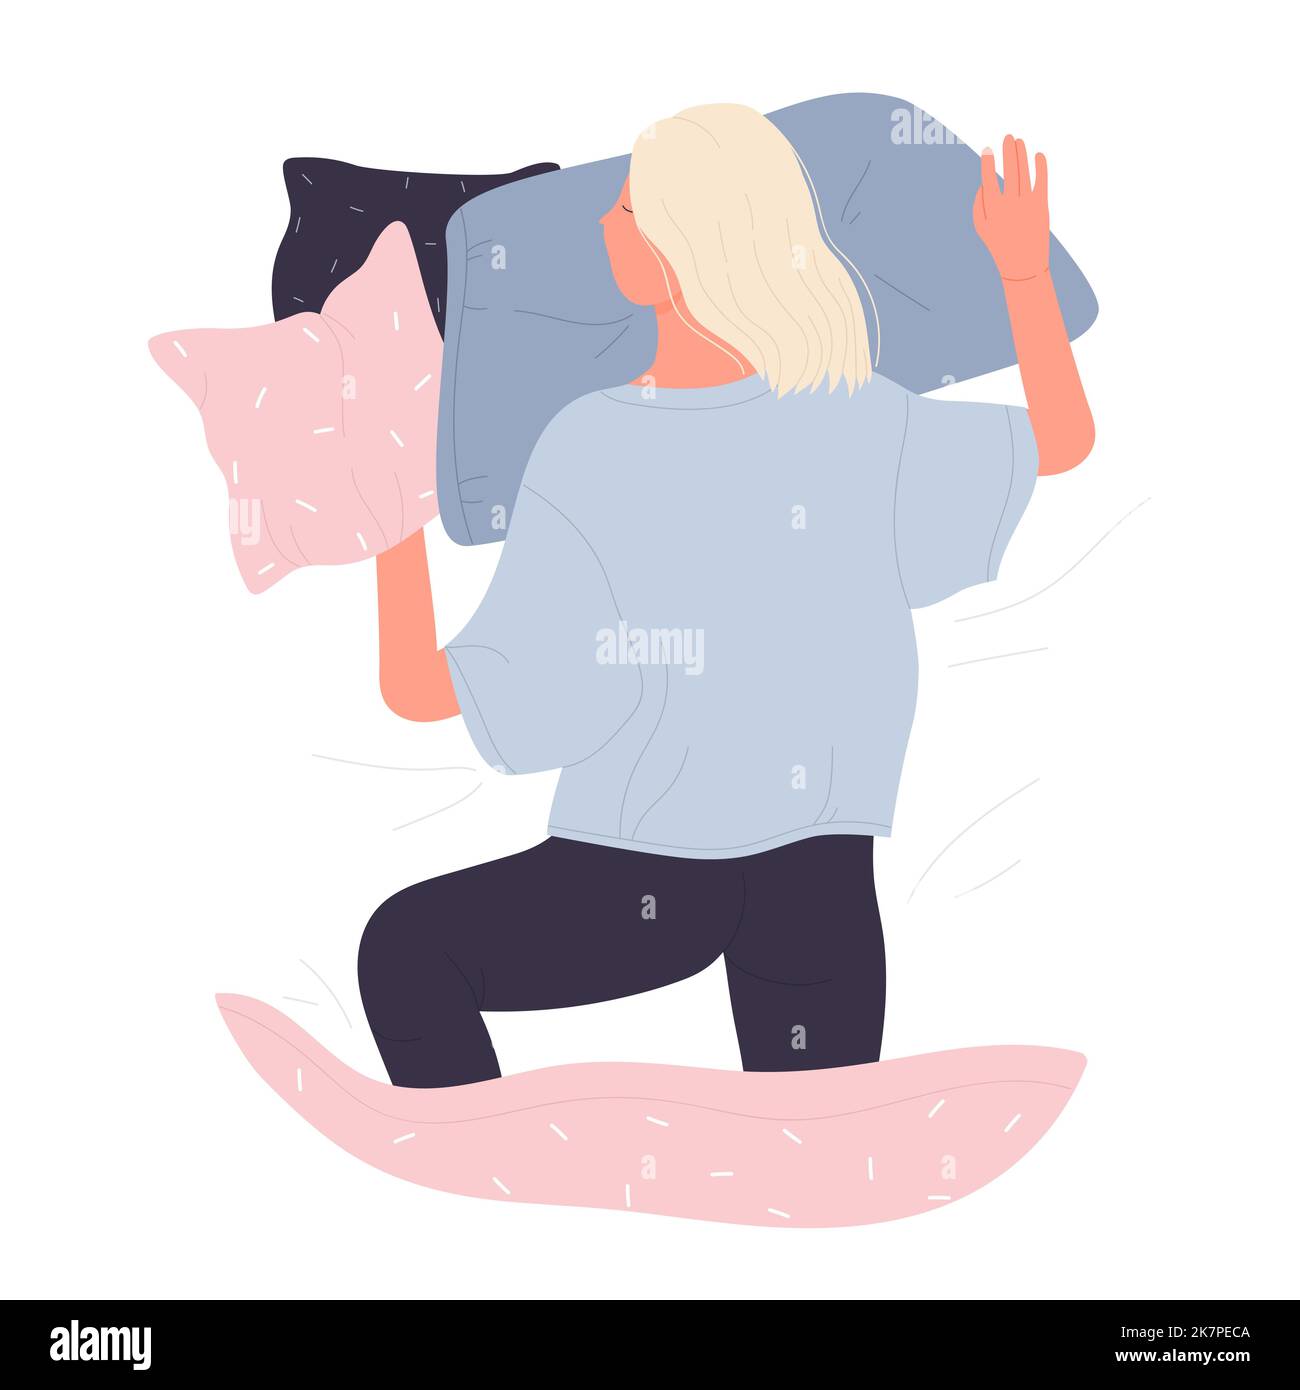 Woman sleeping alone in bed. Pyjamas wearing, night time, dreaming state vector illustration Stock Vector